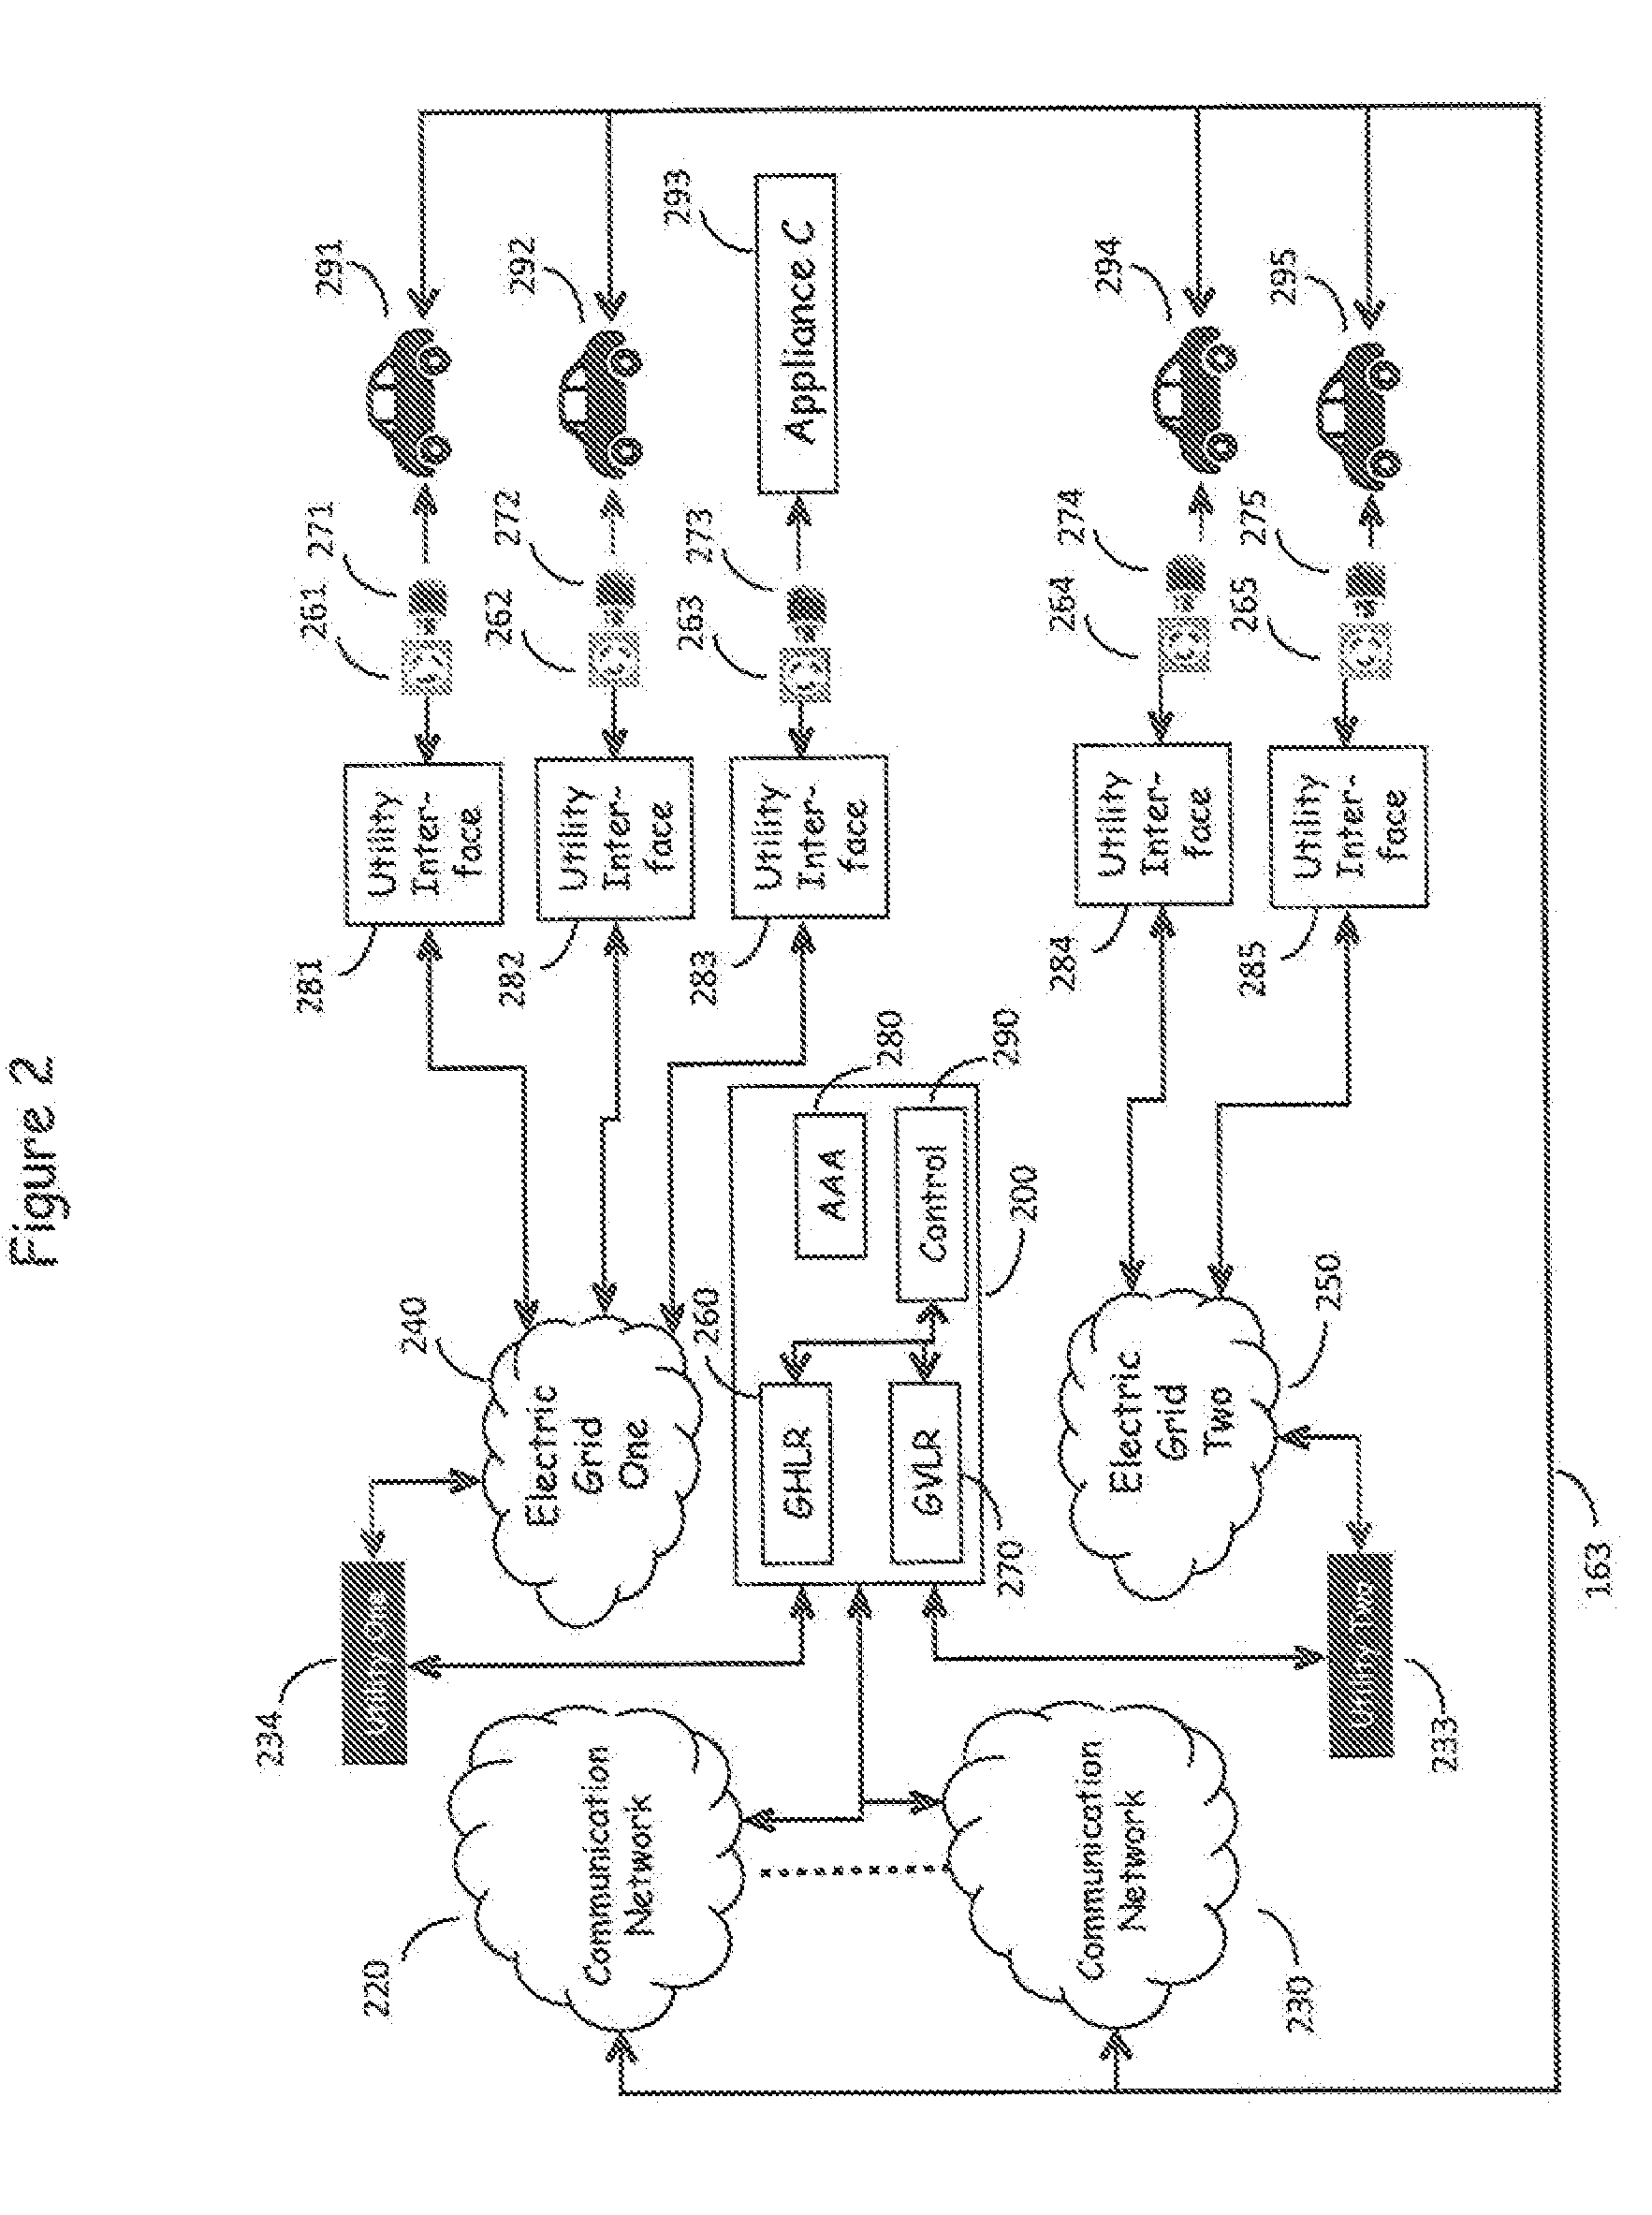 System for on-board metering of recharging energy consumption in vehicles equipped with electrically powered propulsion systems